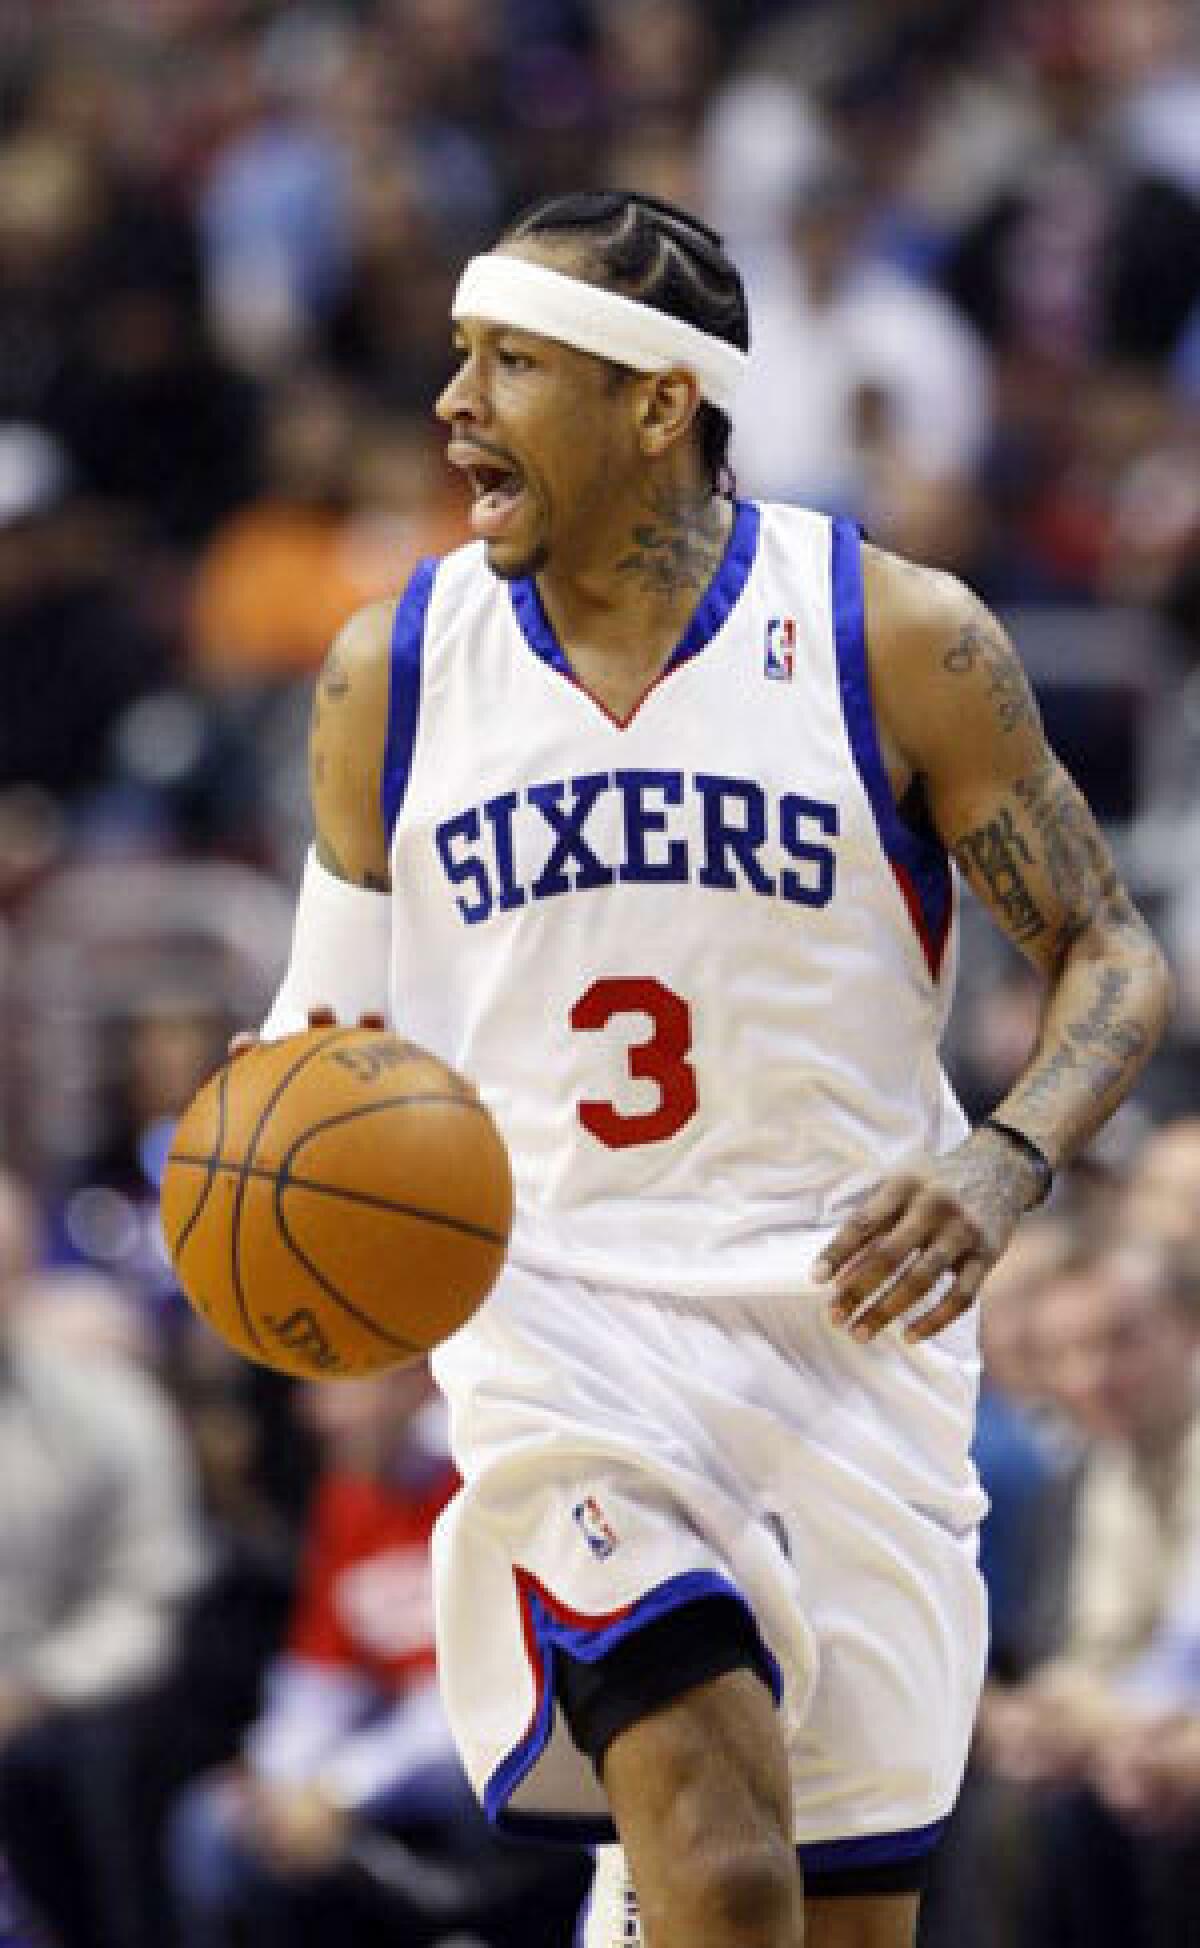 Allen Iverson loses his home to foreclosure, report says - Los